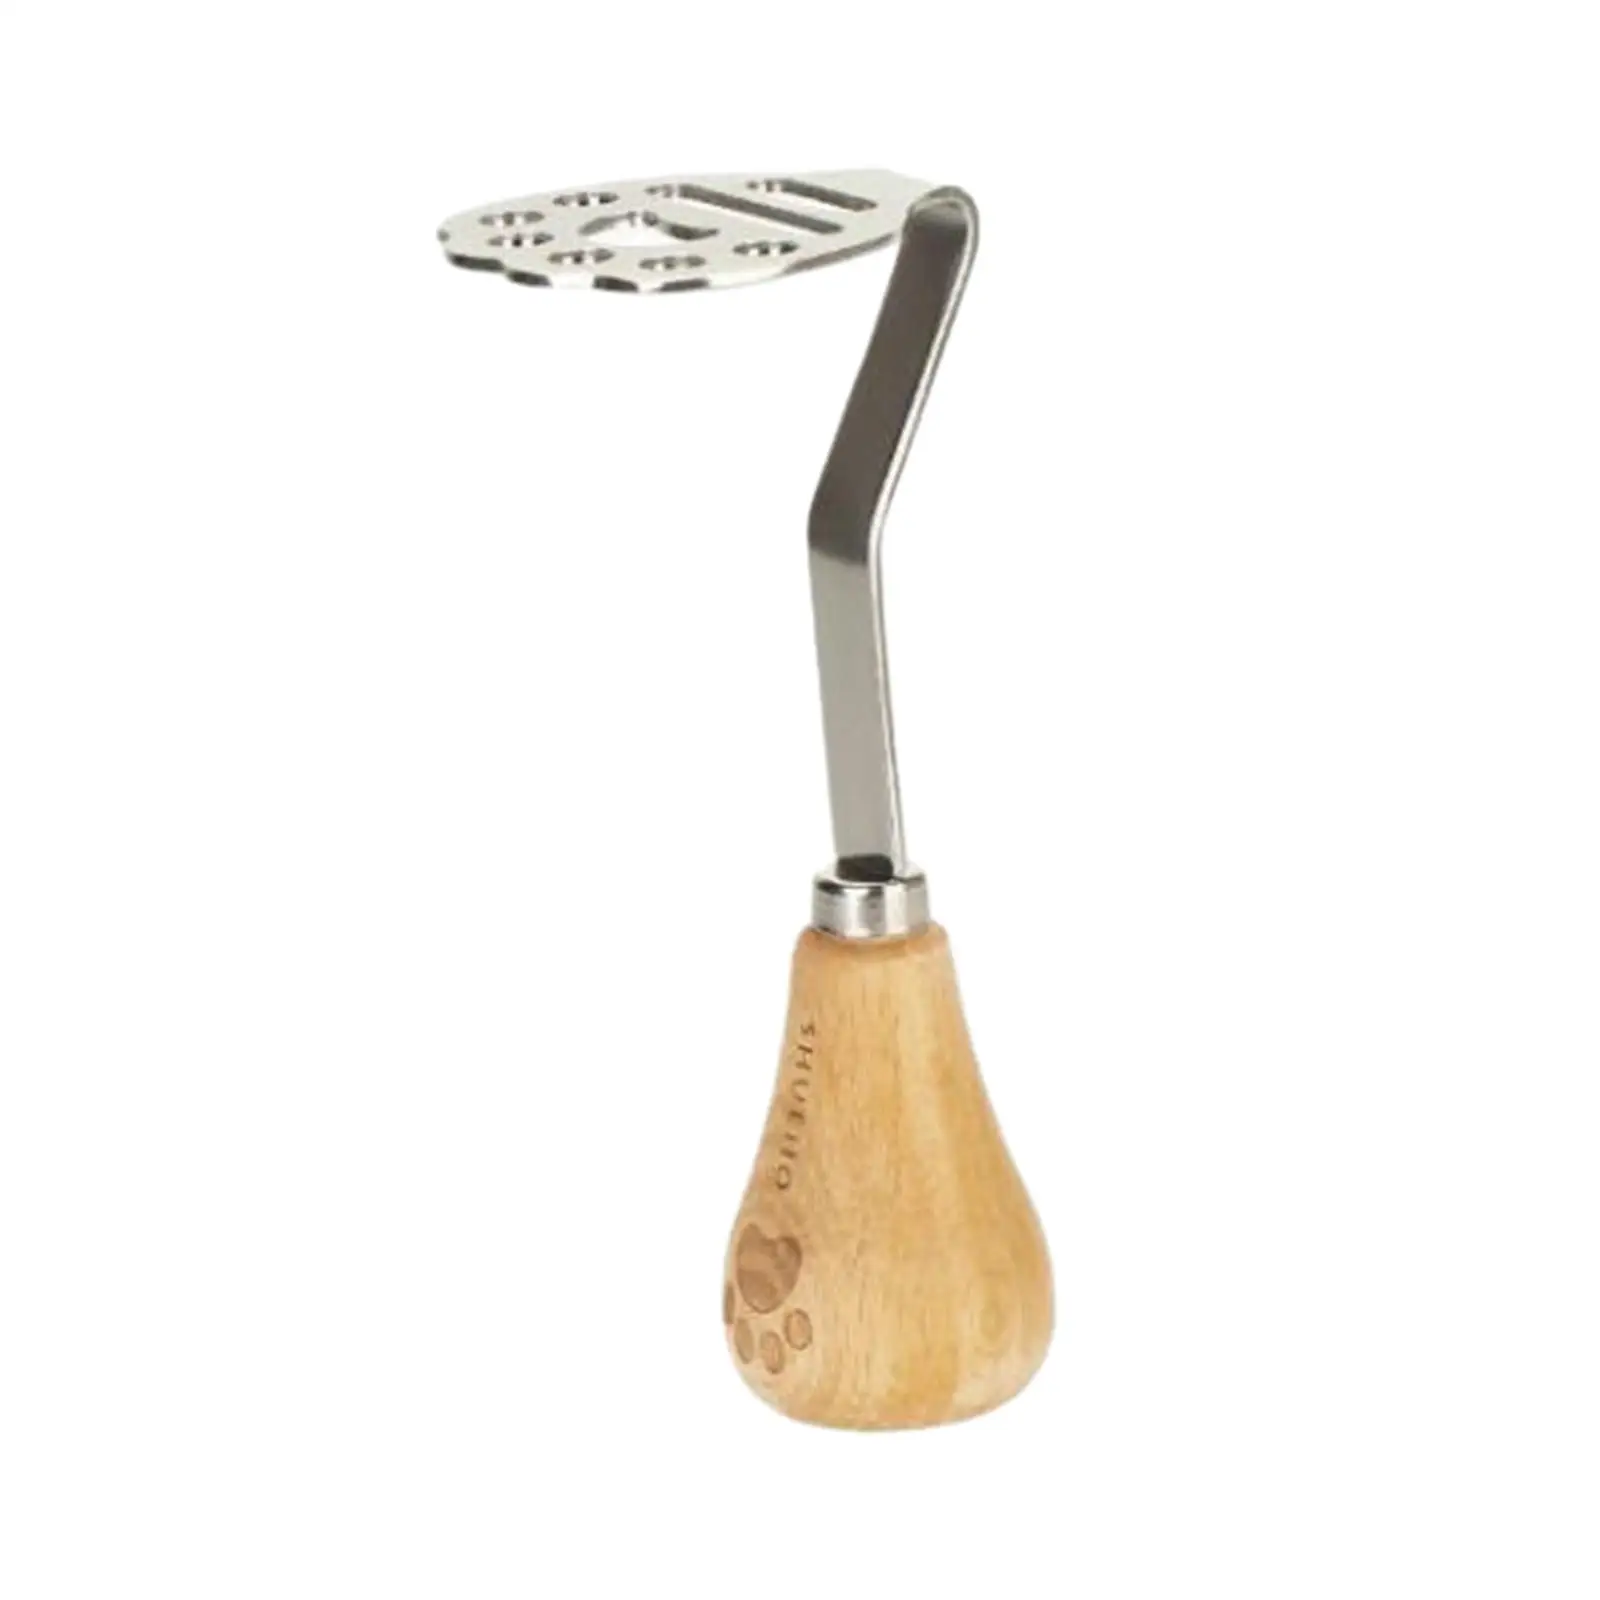 Stainless Steel Potato Masher Gadget Cookware with Wood Handle Ergonomic Hand Masher for Vegetable Bean Fruits Food Bananas